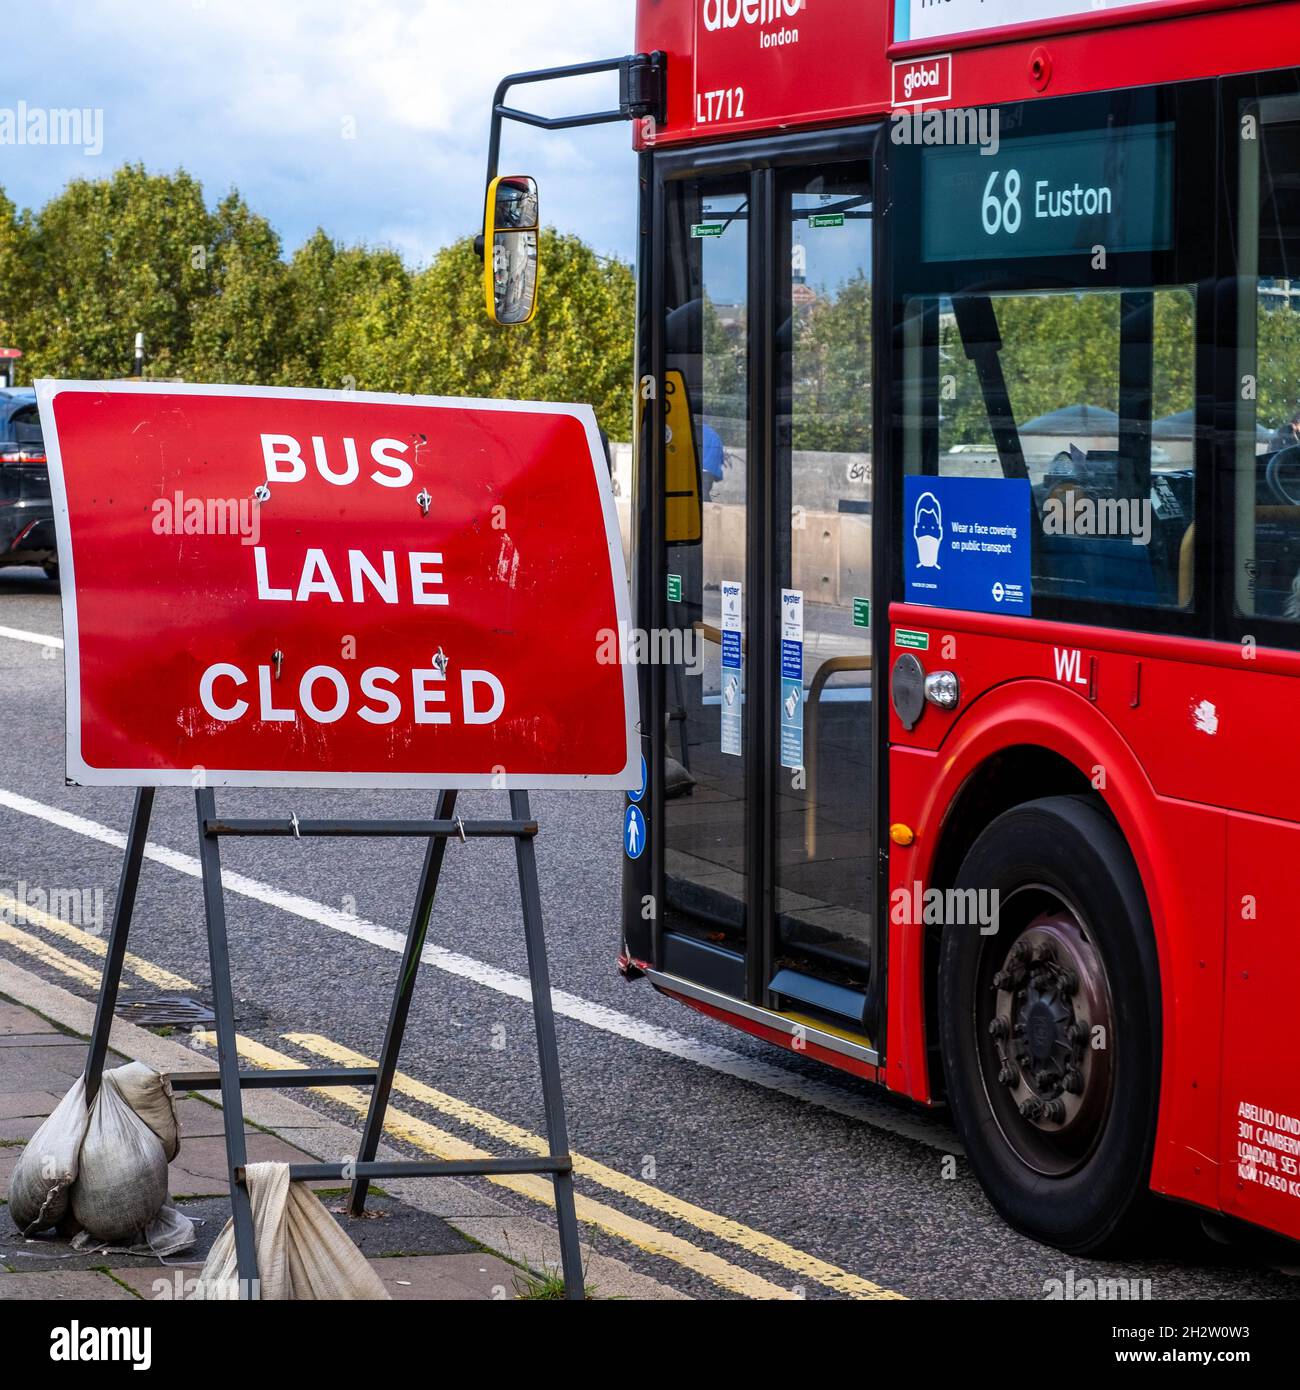 A Traditional Red London Double Decker Bus Nest To A Bus Lane Closed Road Sign And No People Stock Photo